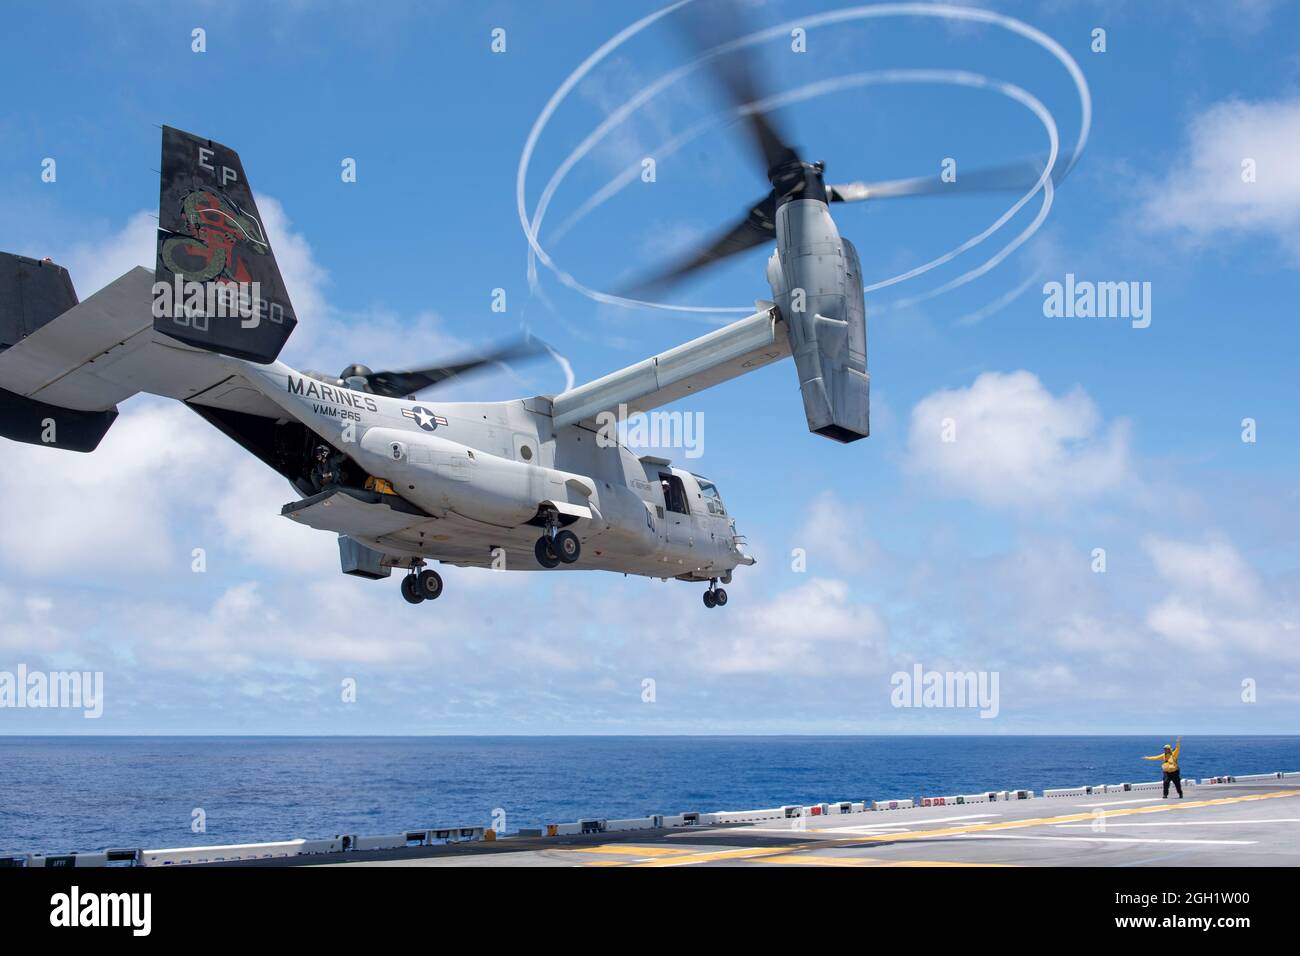 PHILIPPINE SEA (June 2, 2021) An MV-22B Osprey from the 31st Marine Expeditionary Unit (MEU) takes off from the flight deck of the forward-deployed am Stock Photo